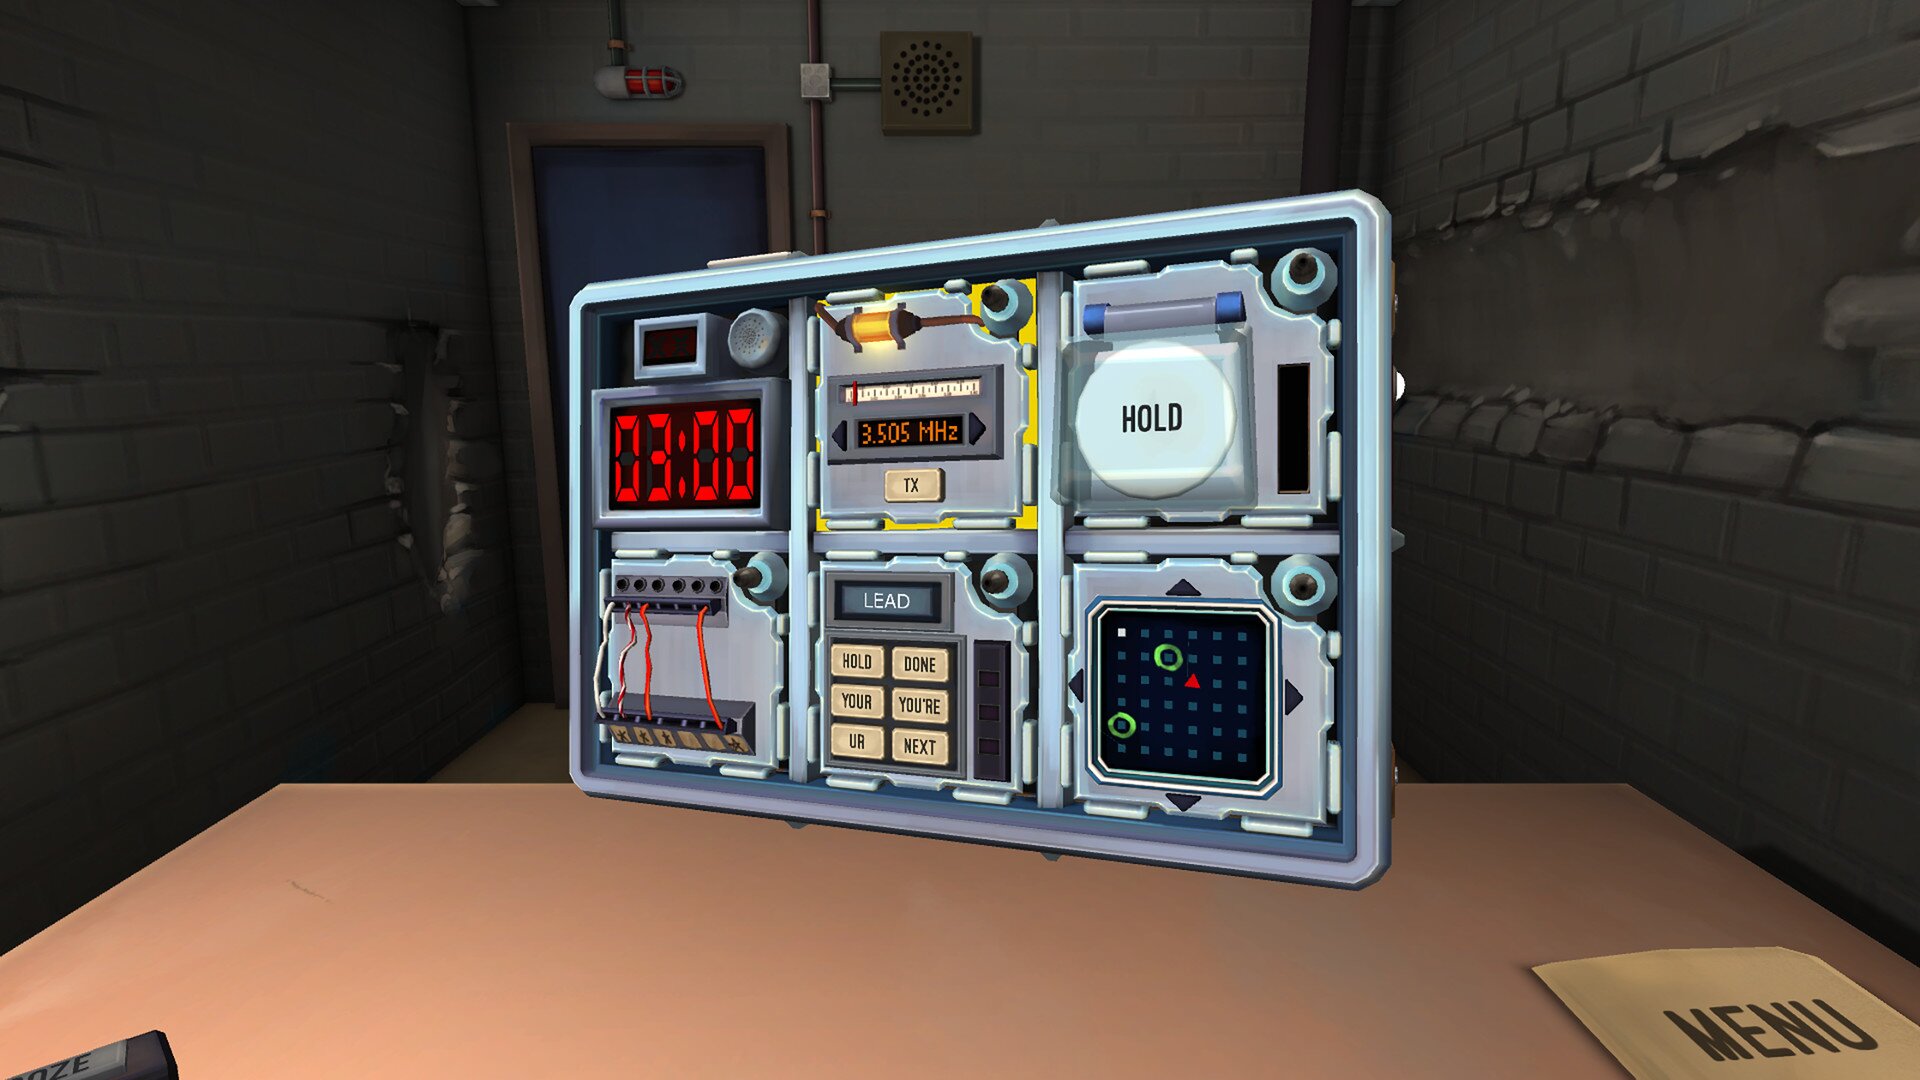 keep talking and nobody explodes free mac torrent